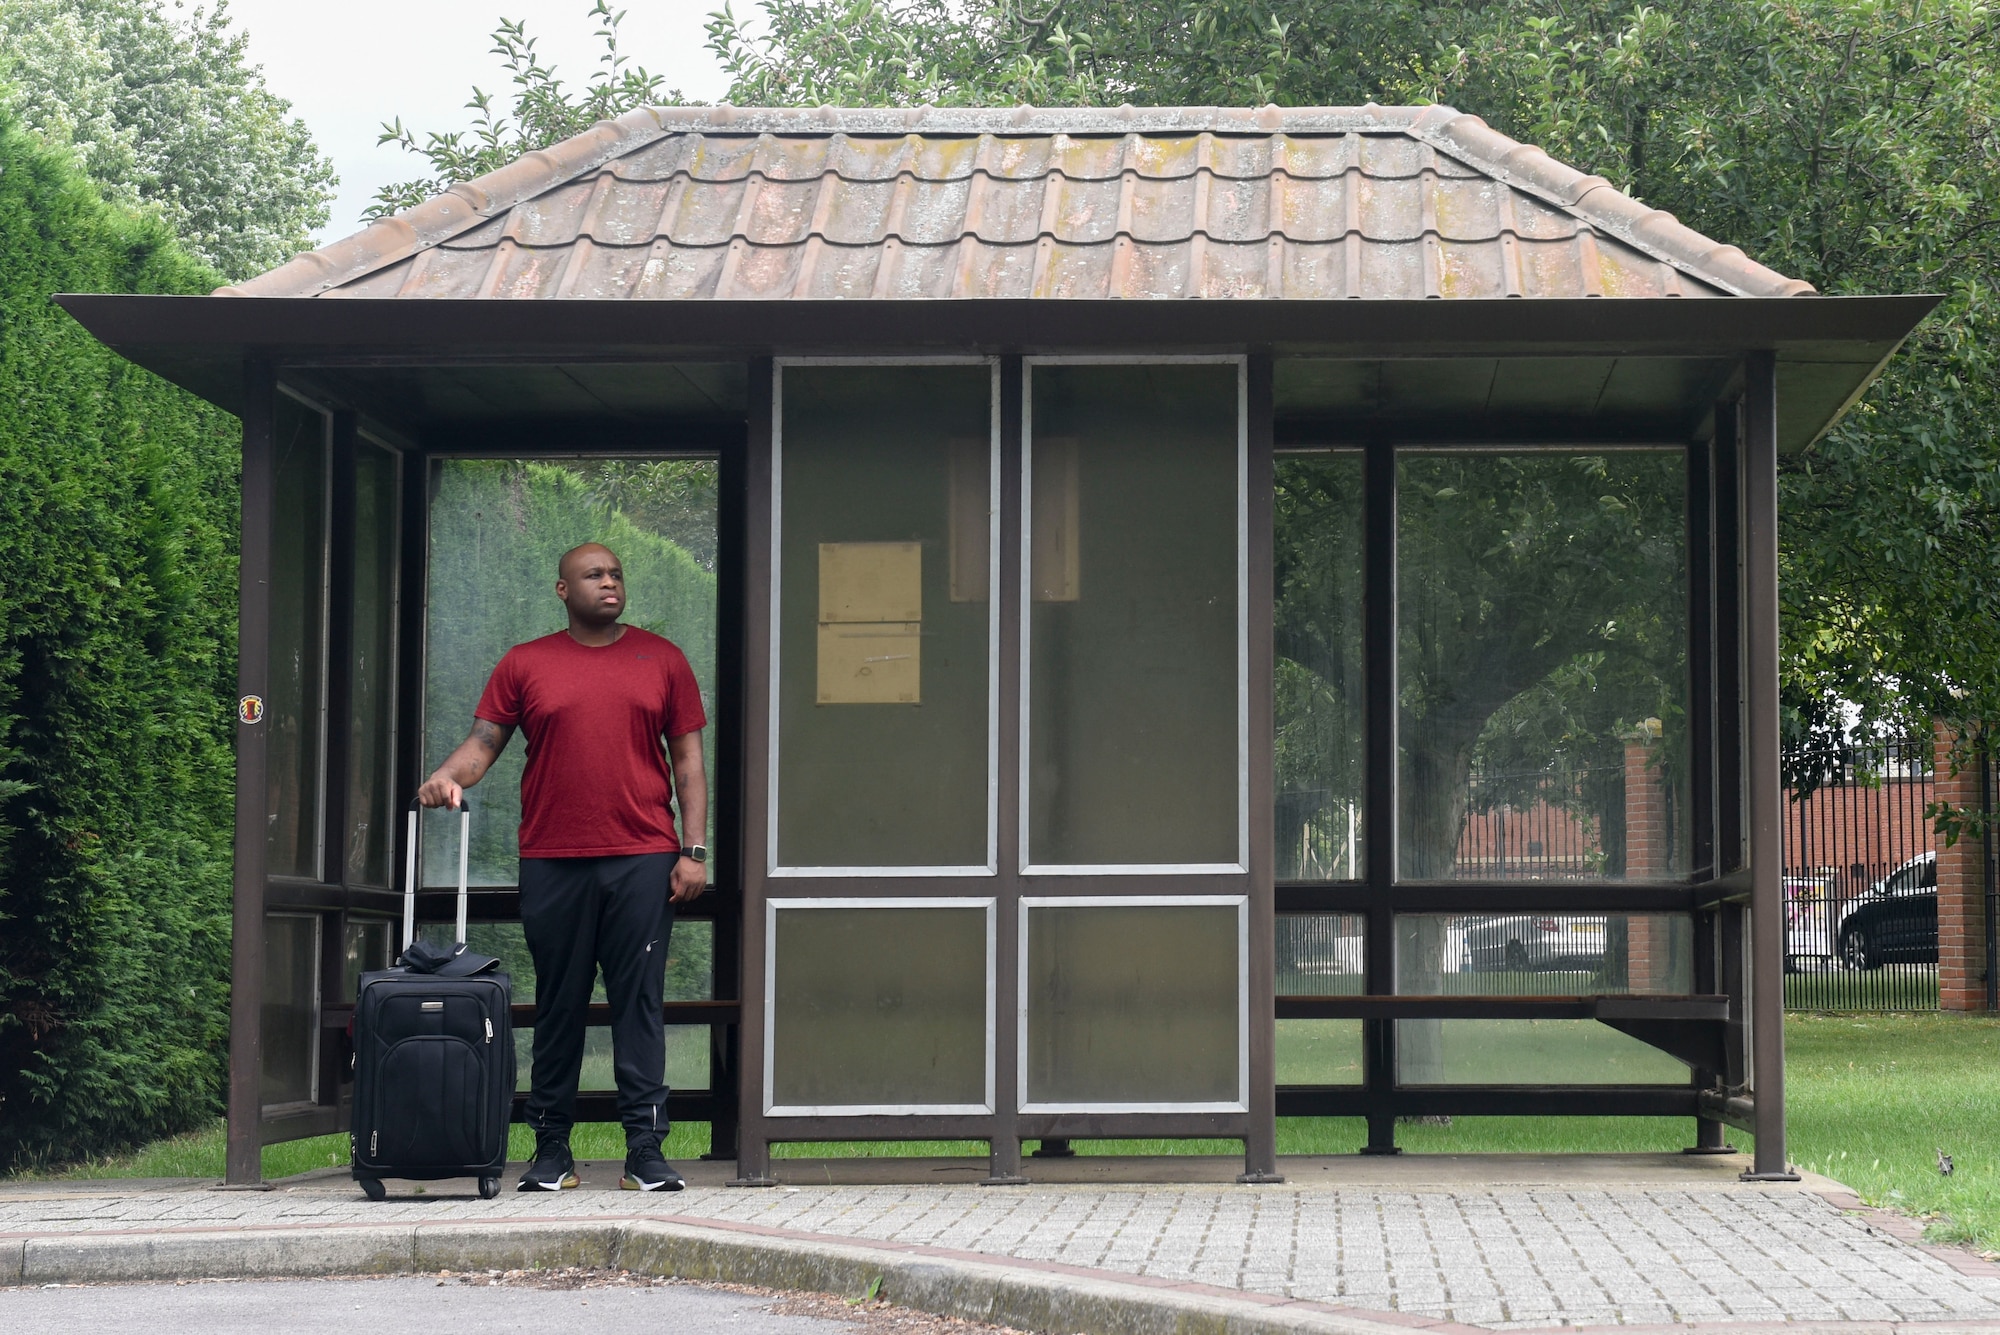 U.S. Air Force Tech. Sgt. Landon Scaife, 100th Air Refueling Wing Equal Opportunity advisor, waits for the bus to take him to the airport at RAF Mildenhall, England, Aug. 6, 2019. Scaife has visited more than 20 countries during his two assignments here. (U.S. Air Force photo by Airman 1st Class Joseph Barron)